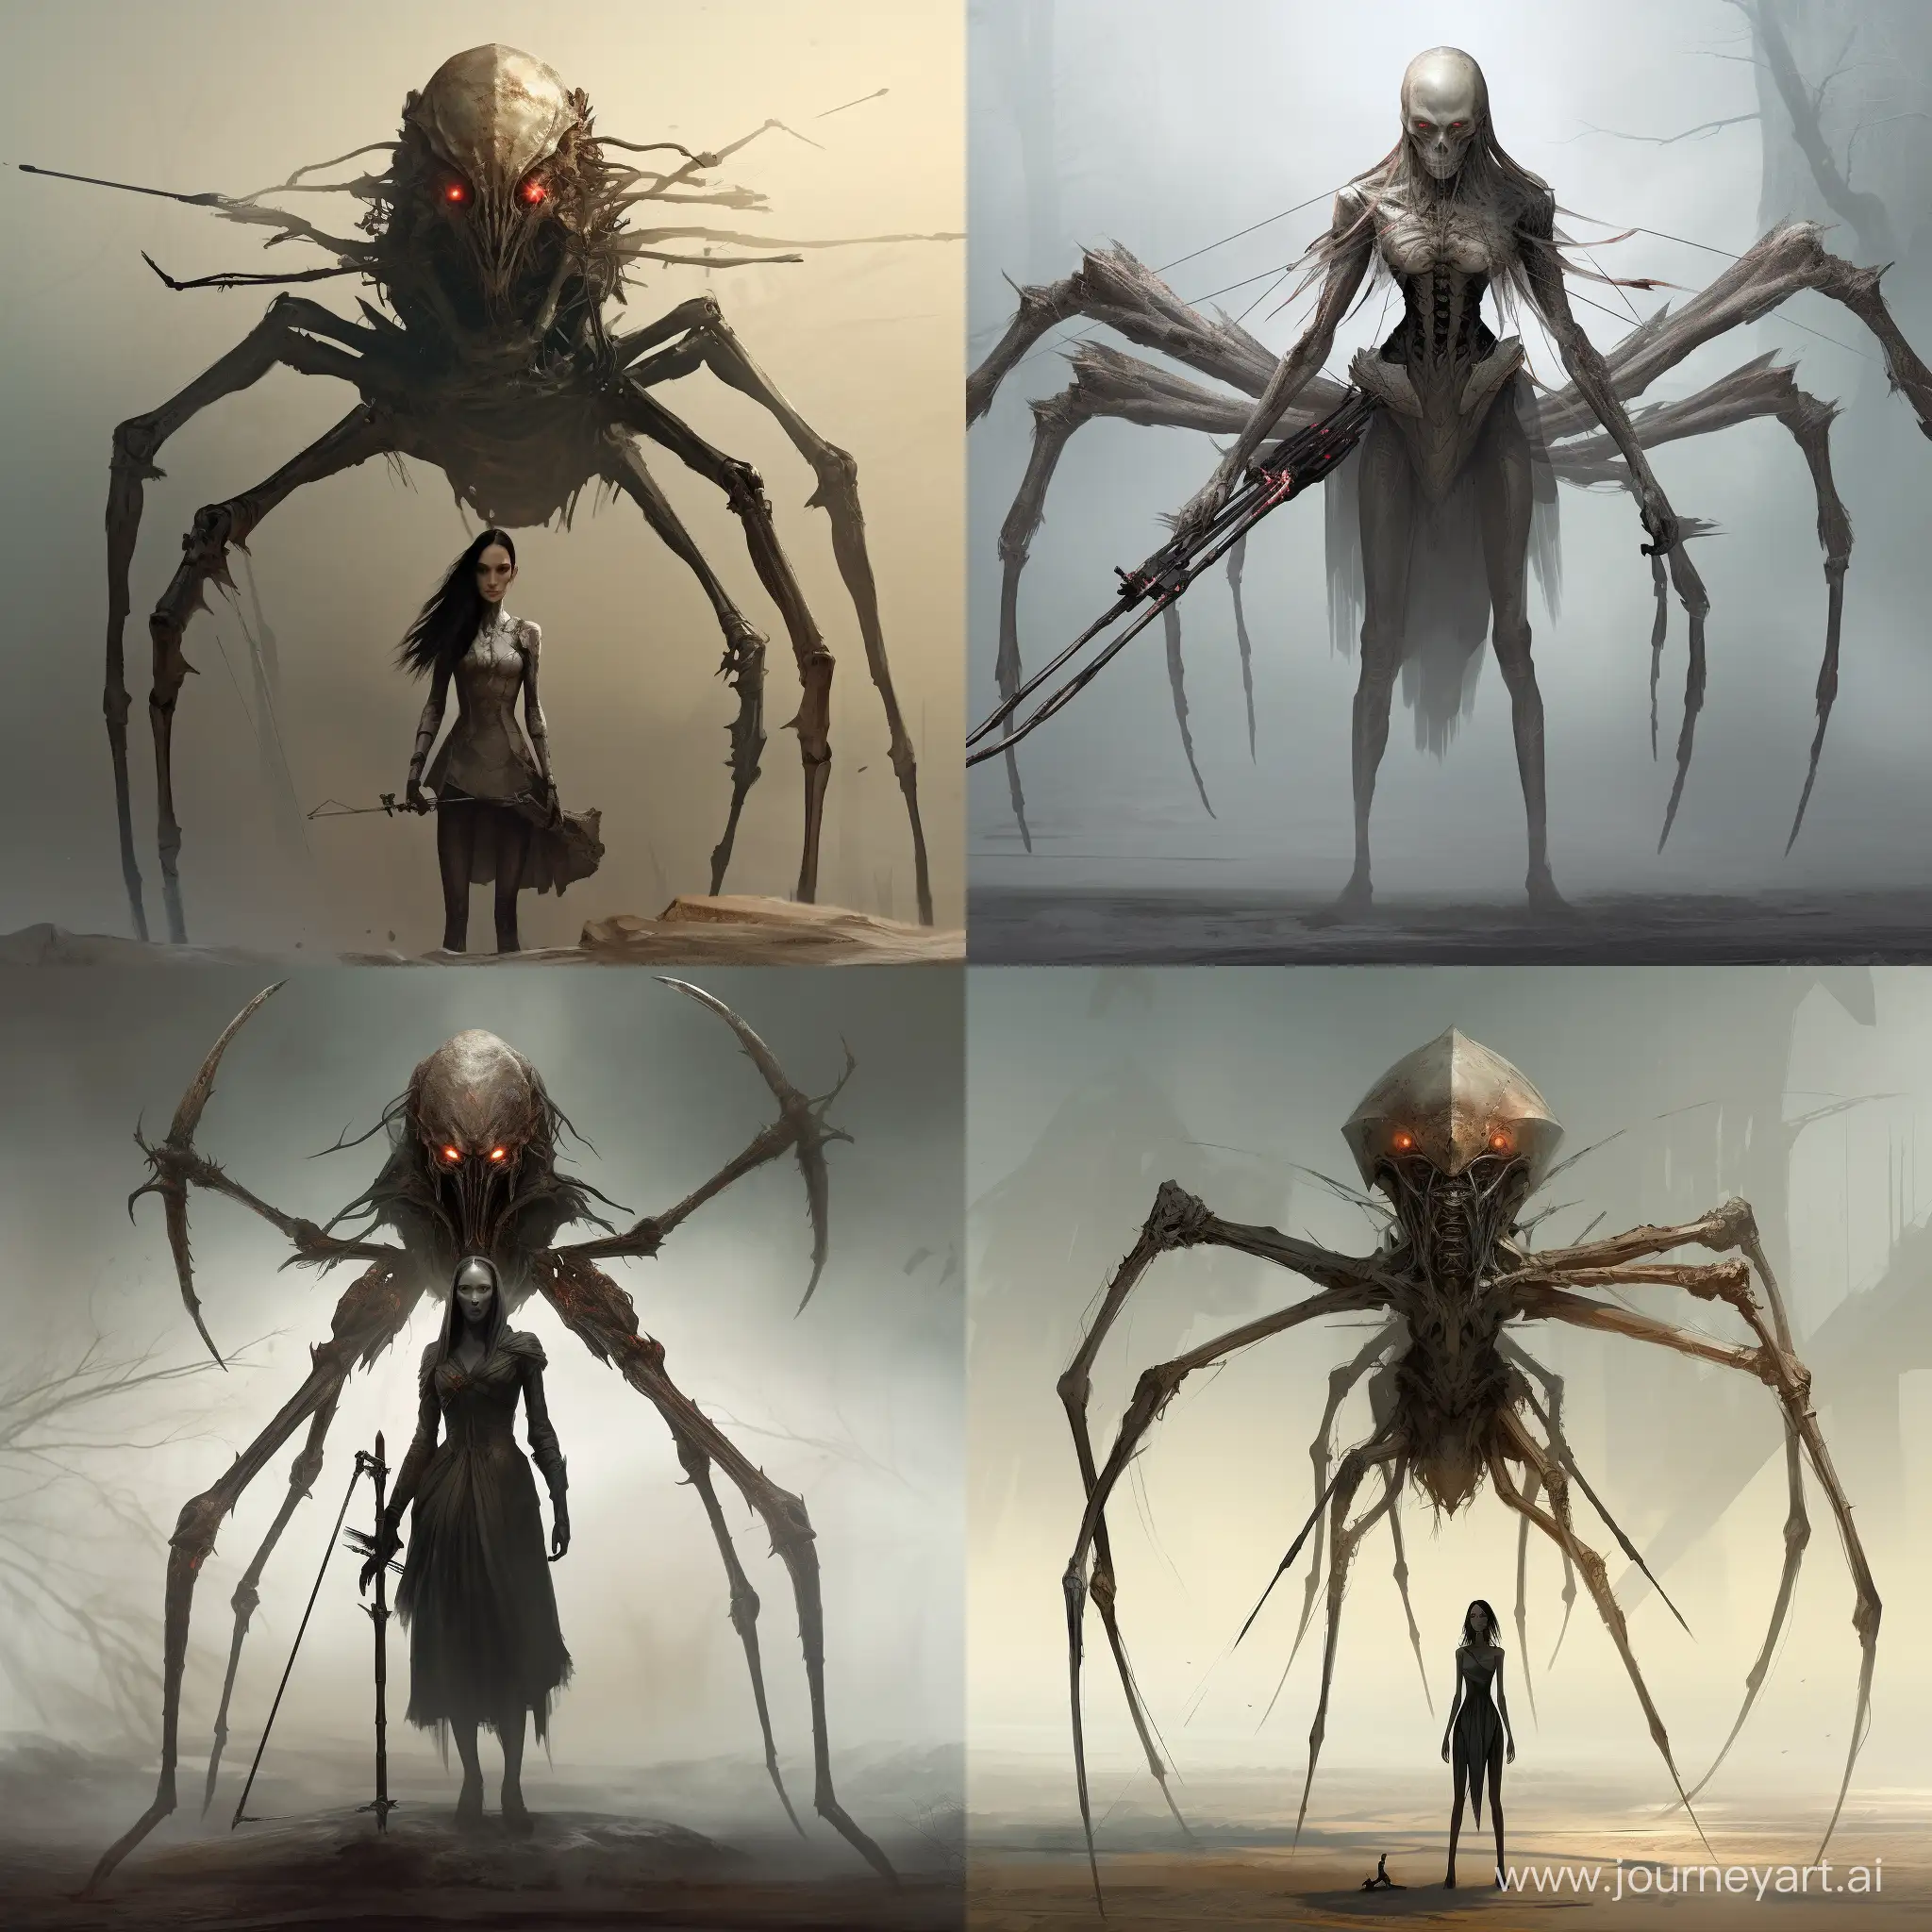 a half-human, half-spider. The top of a man, the bottom of 8 legs with a spider's ass. With a human face but 4 eyes and mandibles. Height 190 cm. The gender is female. With a crossbow